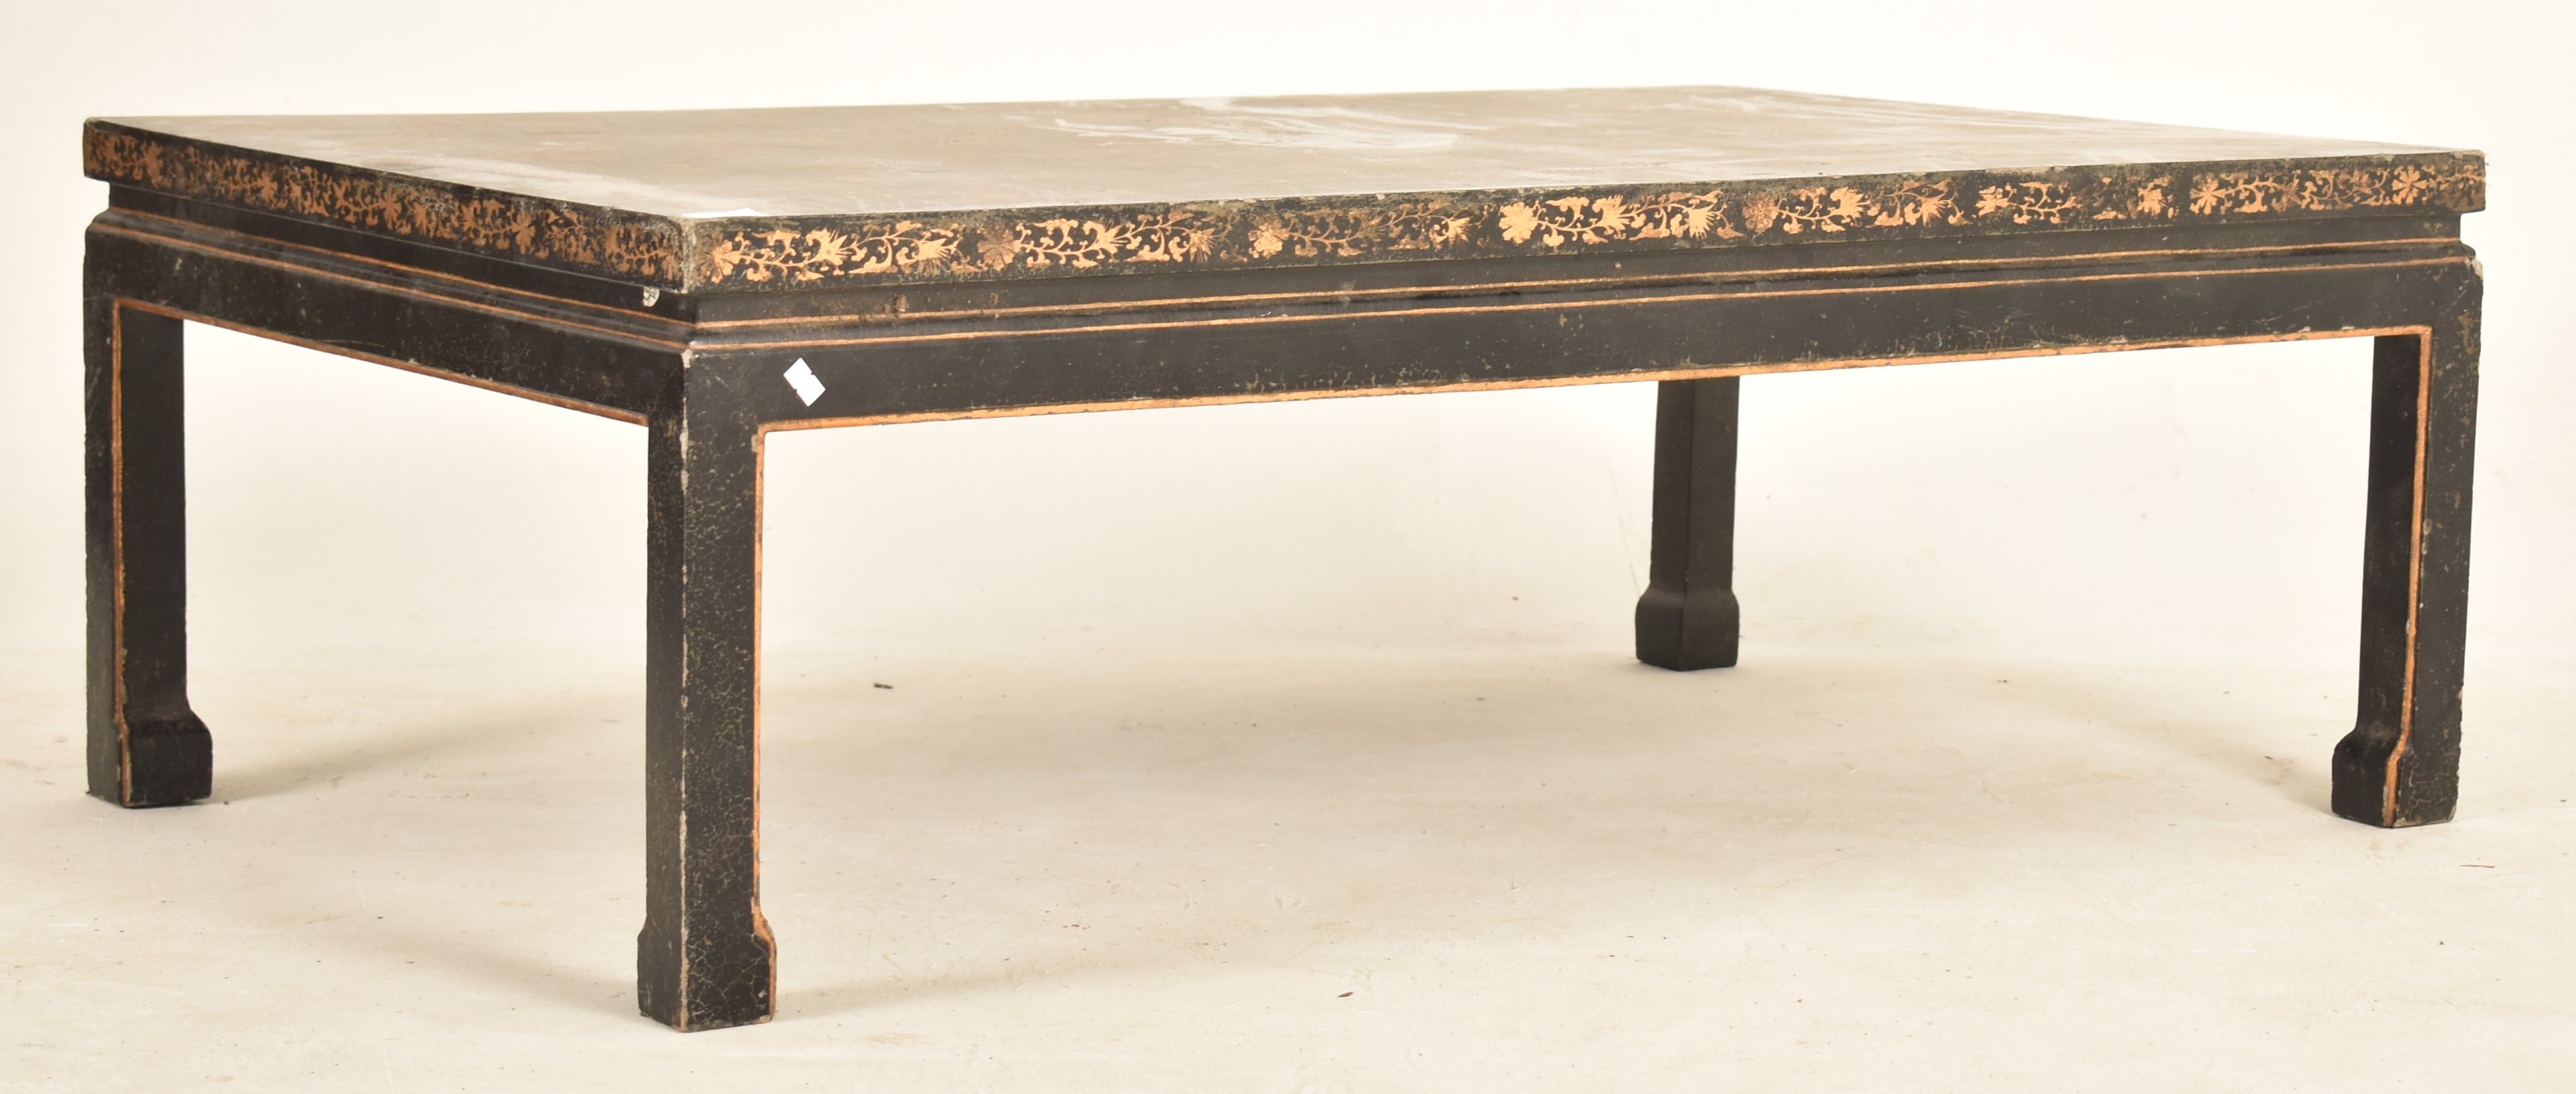 CHINESE EARLY 20TH CENTURY LACQUERED LOW COFFEE TABLE - Image 5 of 5